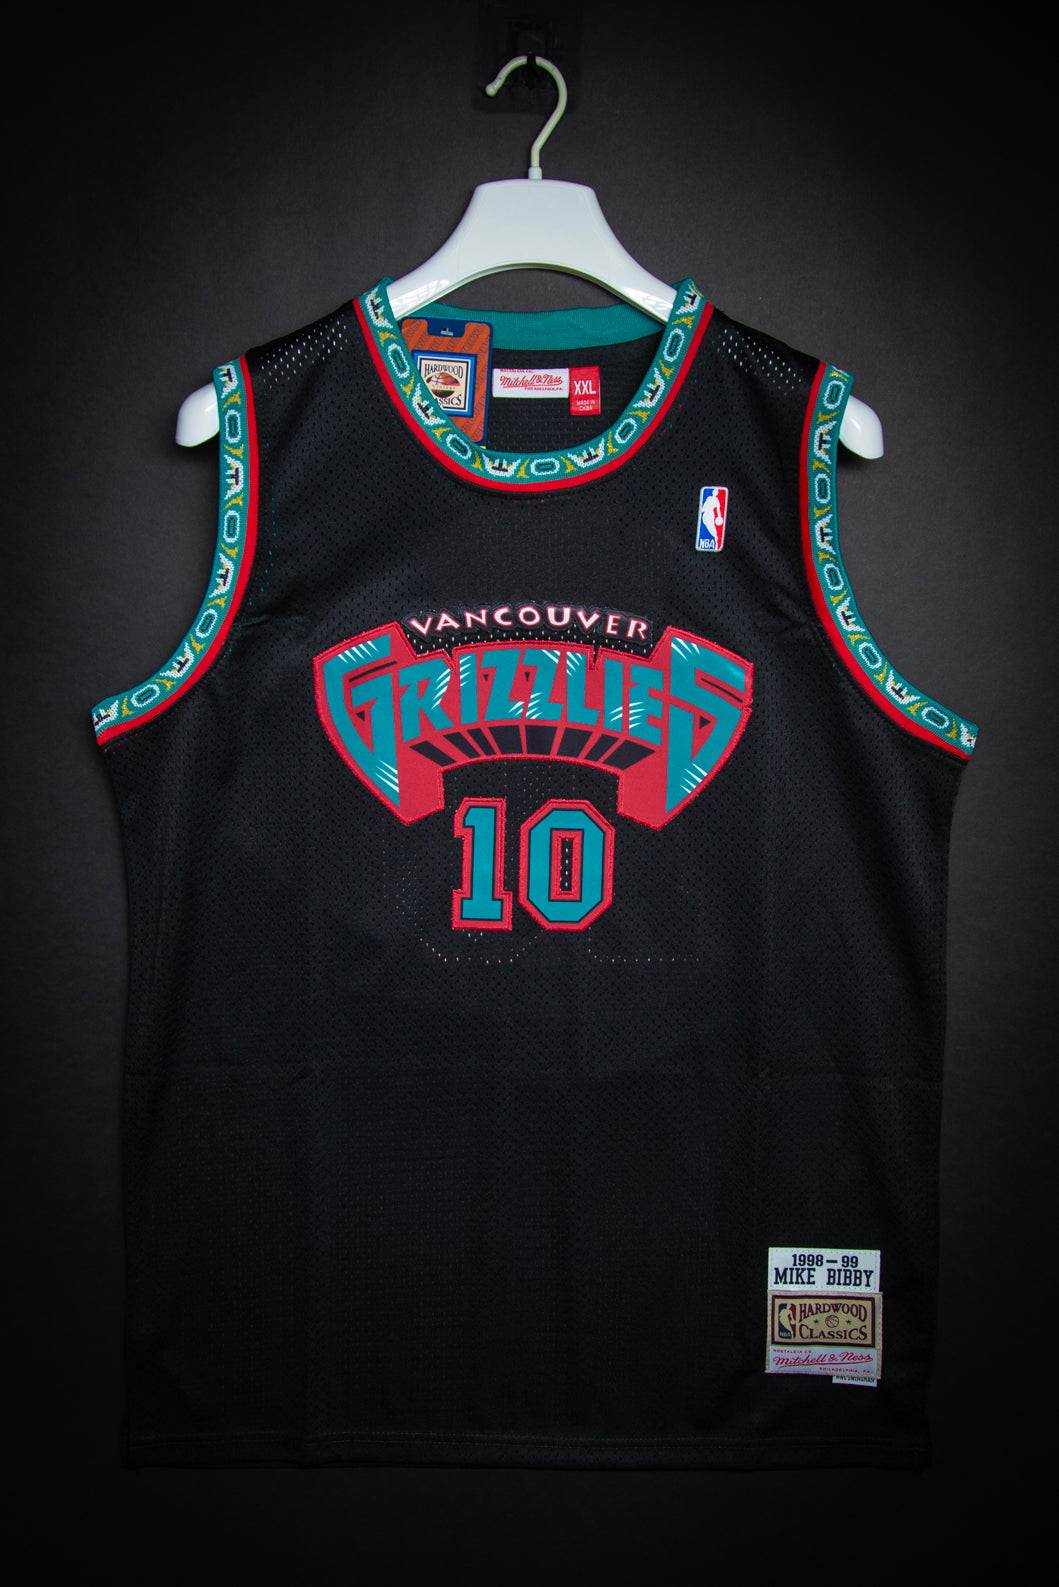 Mitchell & Ness Mike Bibby Vancouver Grizzlies Black Teal Hardwood Classics Swingman Jersey by Devious Elements App 2XL